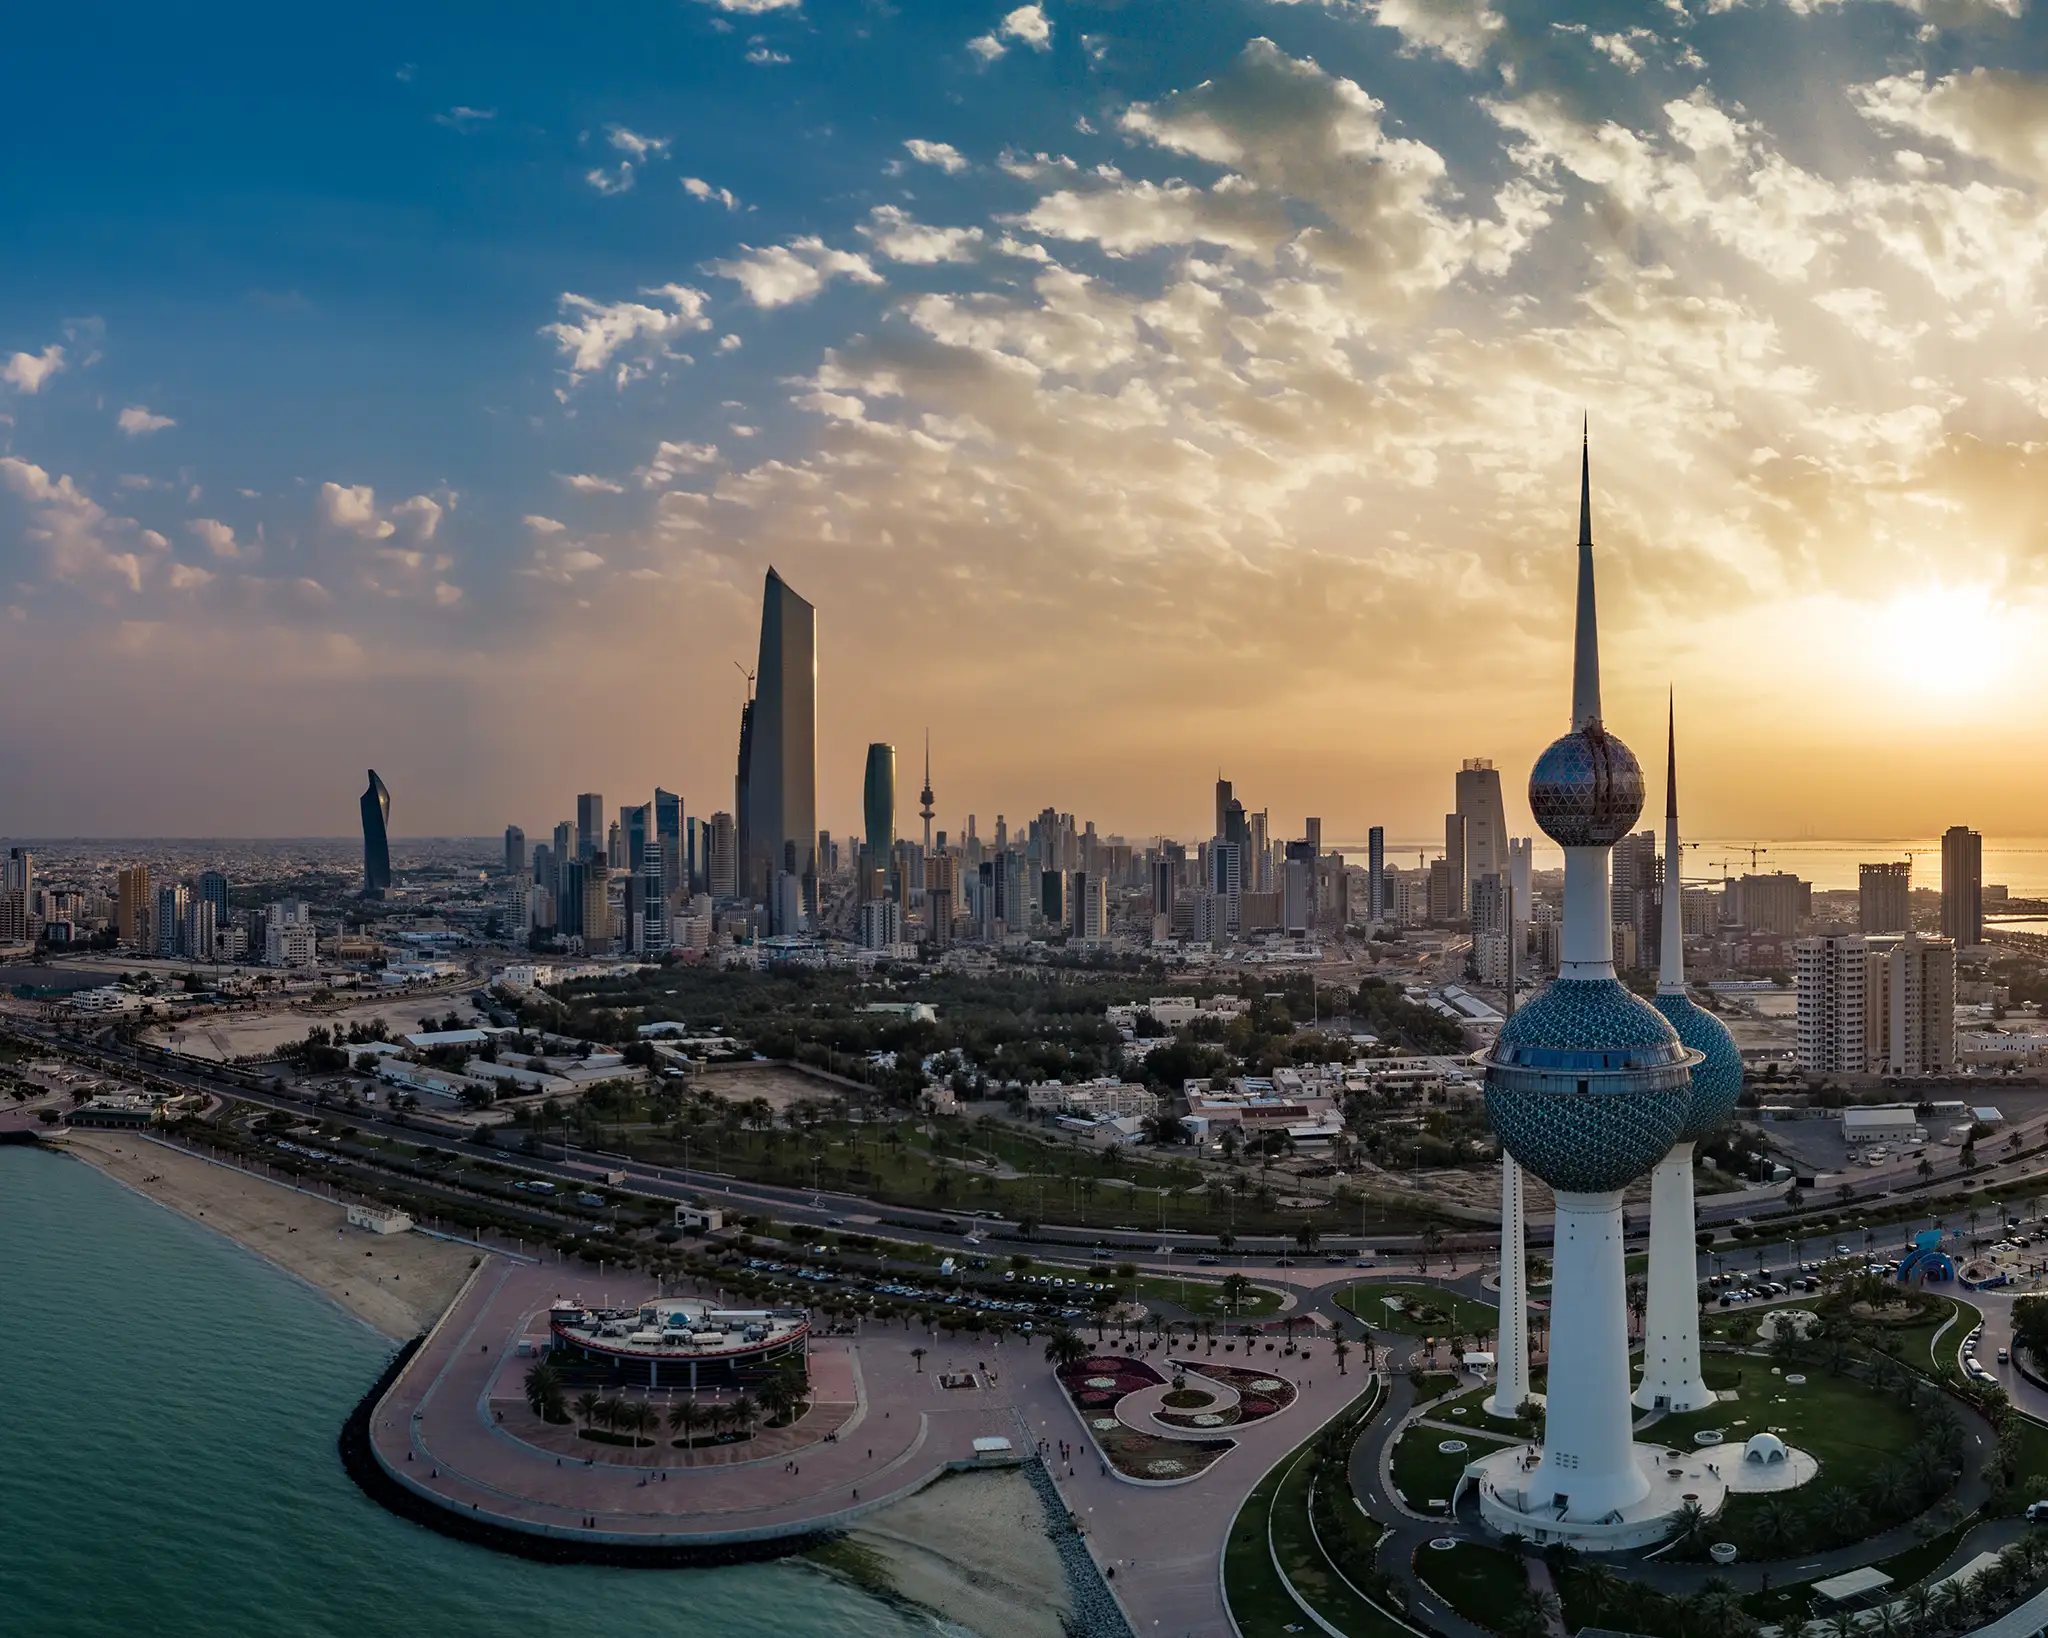 Aerial view of Kuwait city.